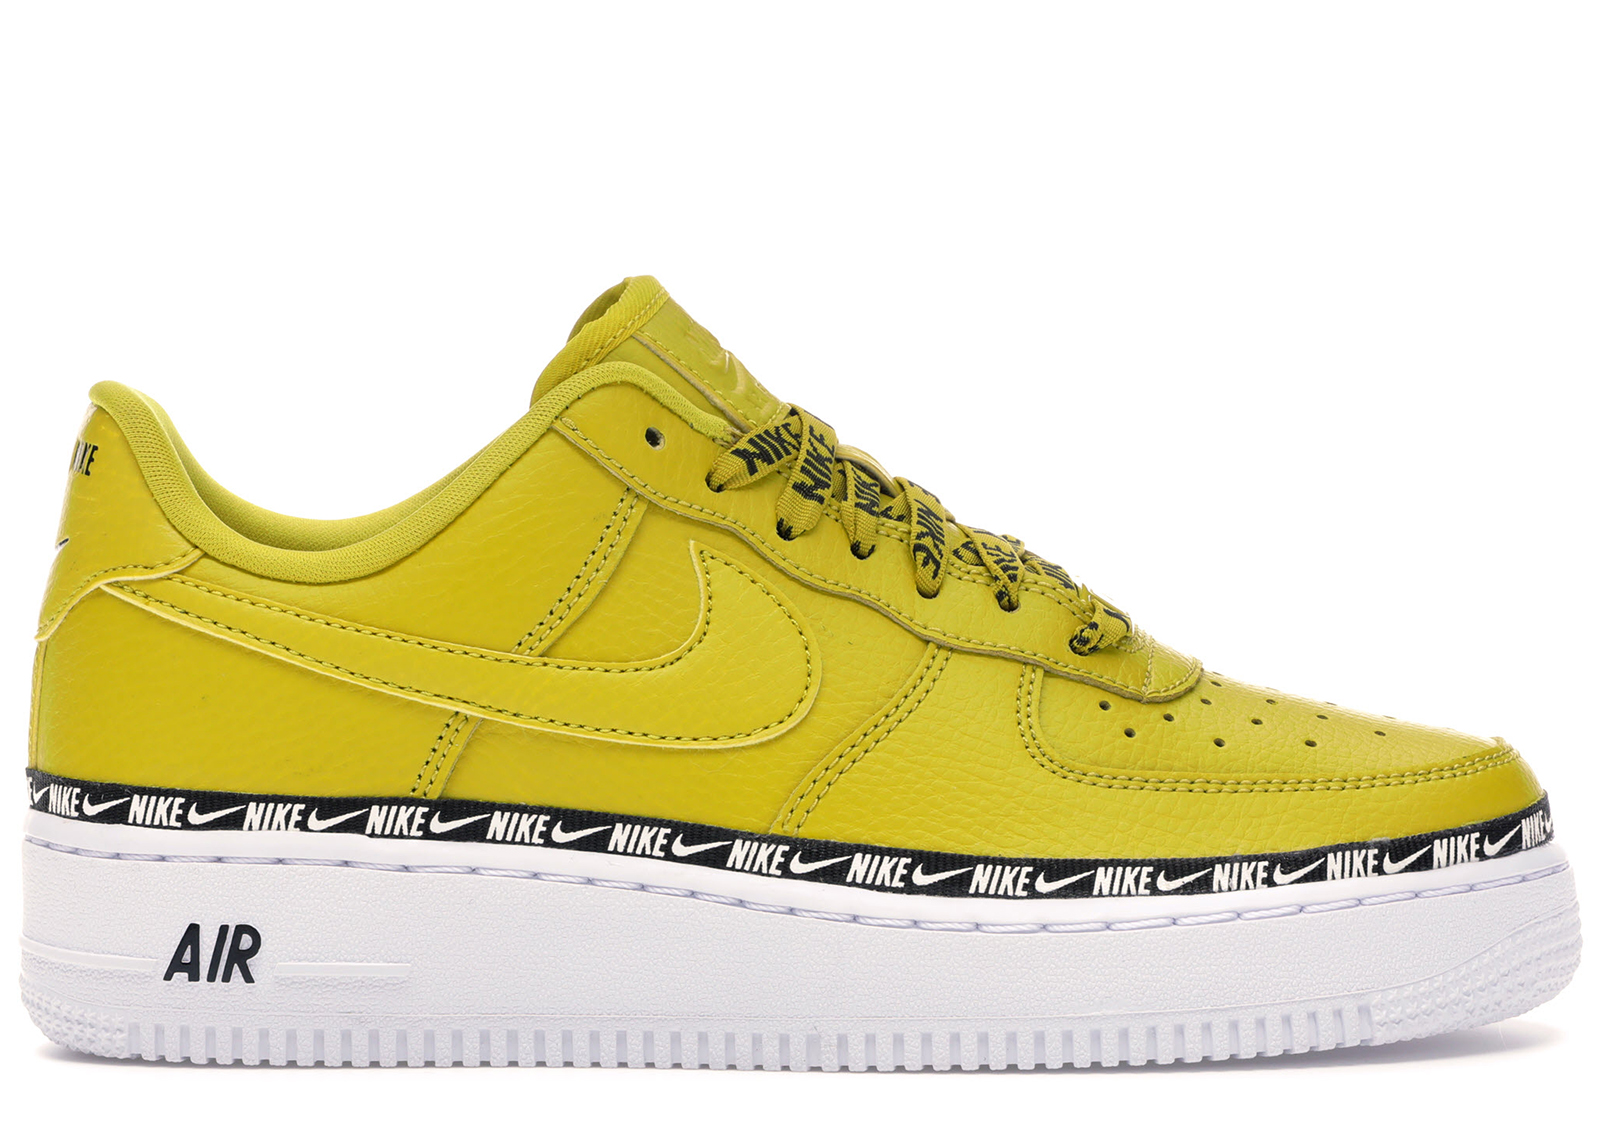 Nike Air Force 1 Low Overbranding Bright Citron (Women's)